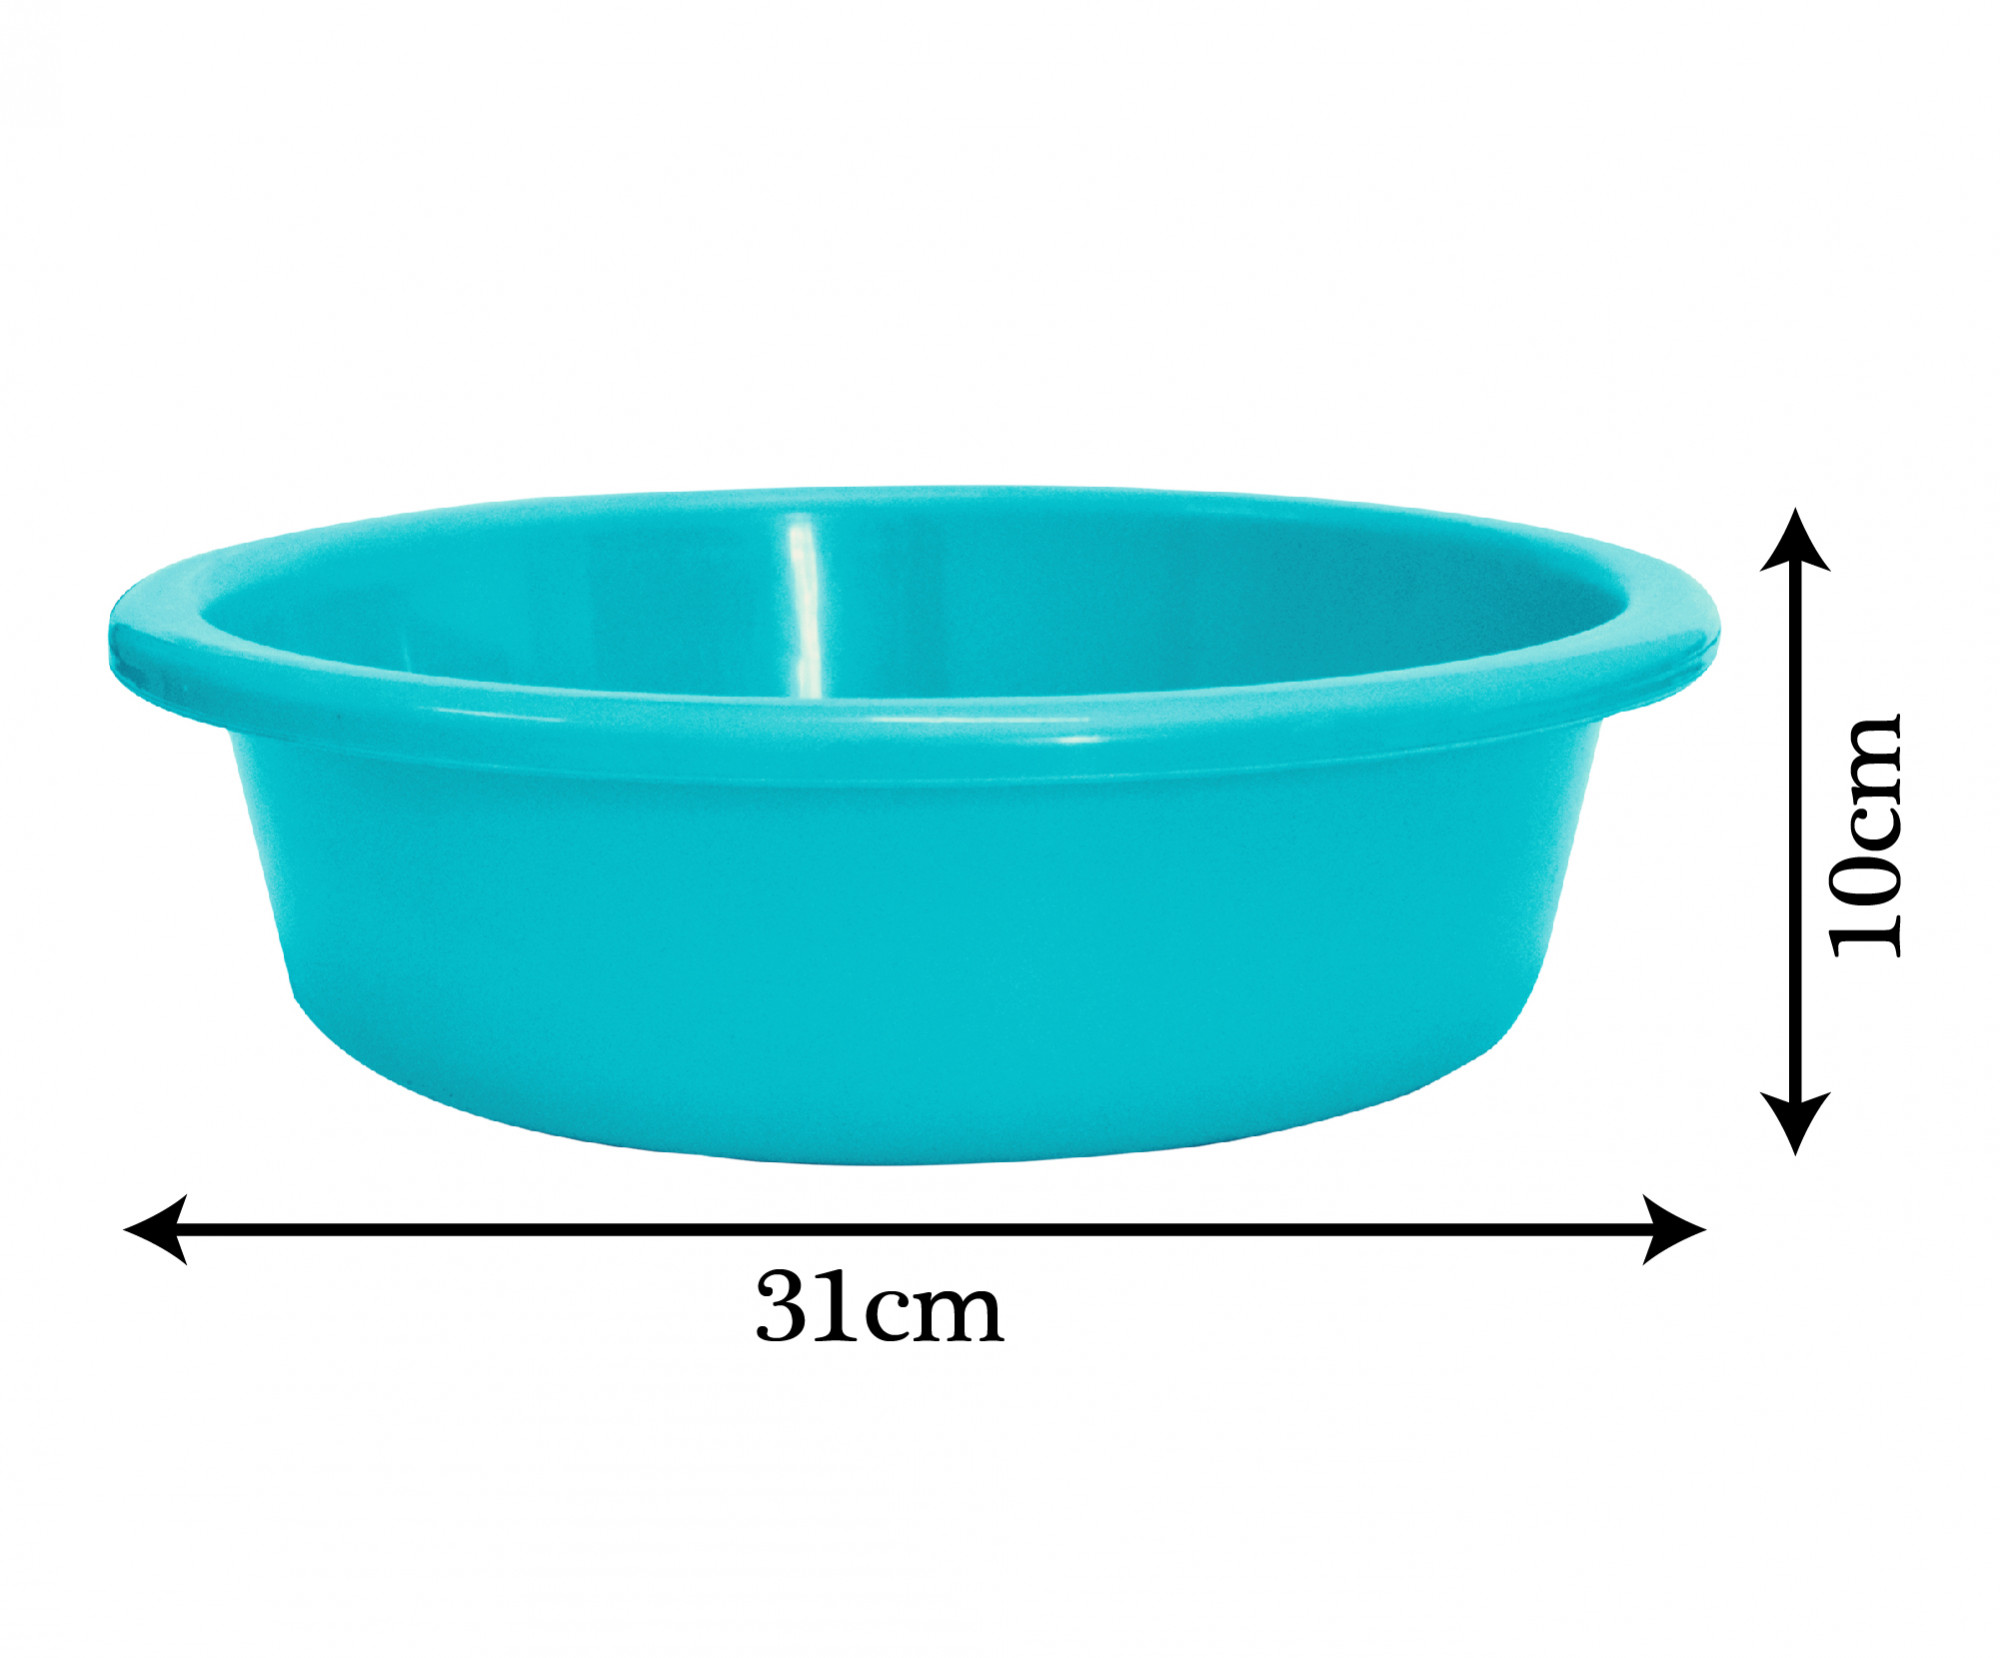 Kuber Industries Multiuses Unbreakable Plastic Knead Dough Basket/Basin Bowl For Home & Kitchen 6 Ltr- Pack of 2 (Yellow & Sky Blue)